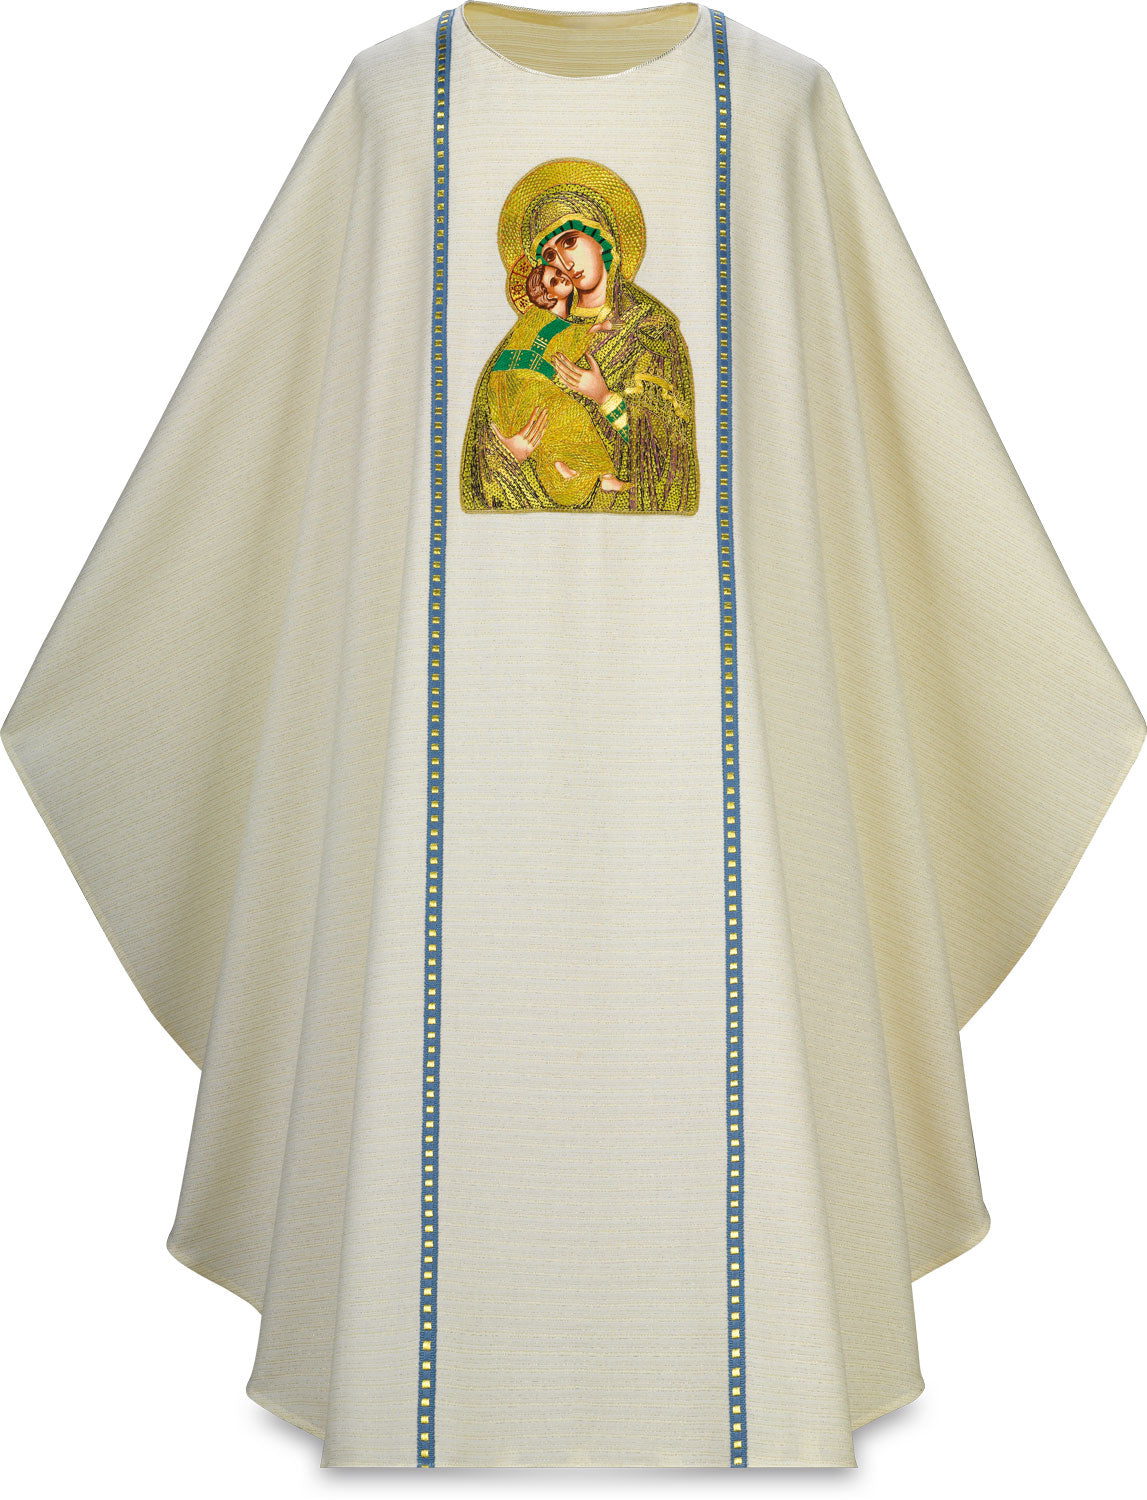 our-lady-of-perpetual-help-chasuble-3871.jpg